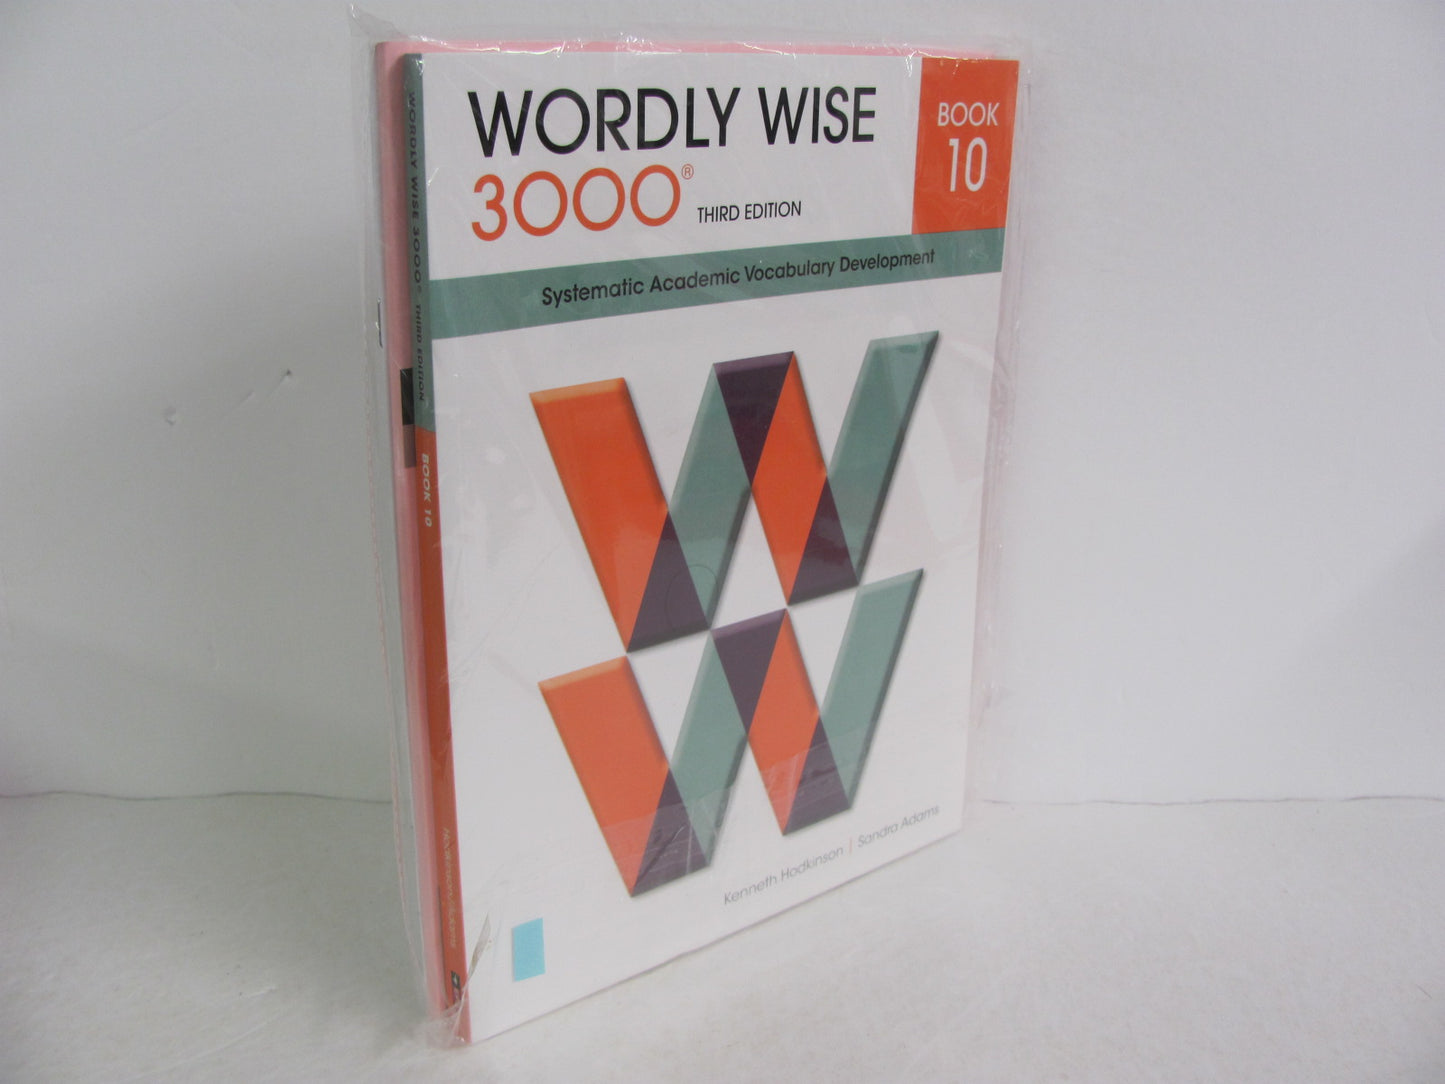 Wordly Wise 3000 EPS Set  Pre-Owned 10th Grade Spelling/Vocabulary Books